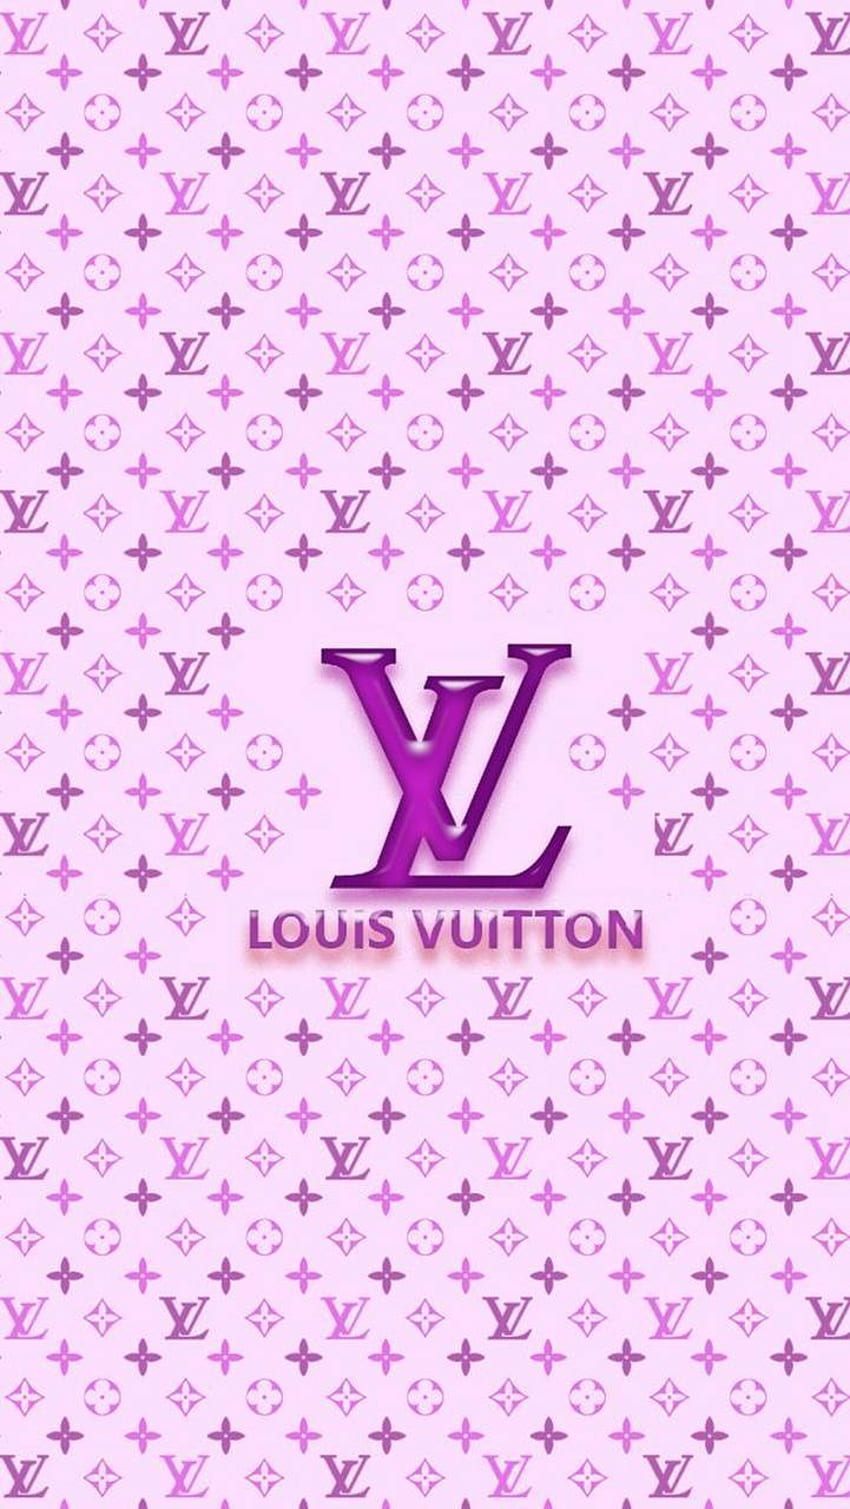 Louis Vuitton Aesthetic Background - 2021  Free iphone wallpaper, Iphone  wallpaper, Iphone wallpaper vintage